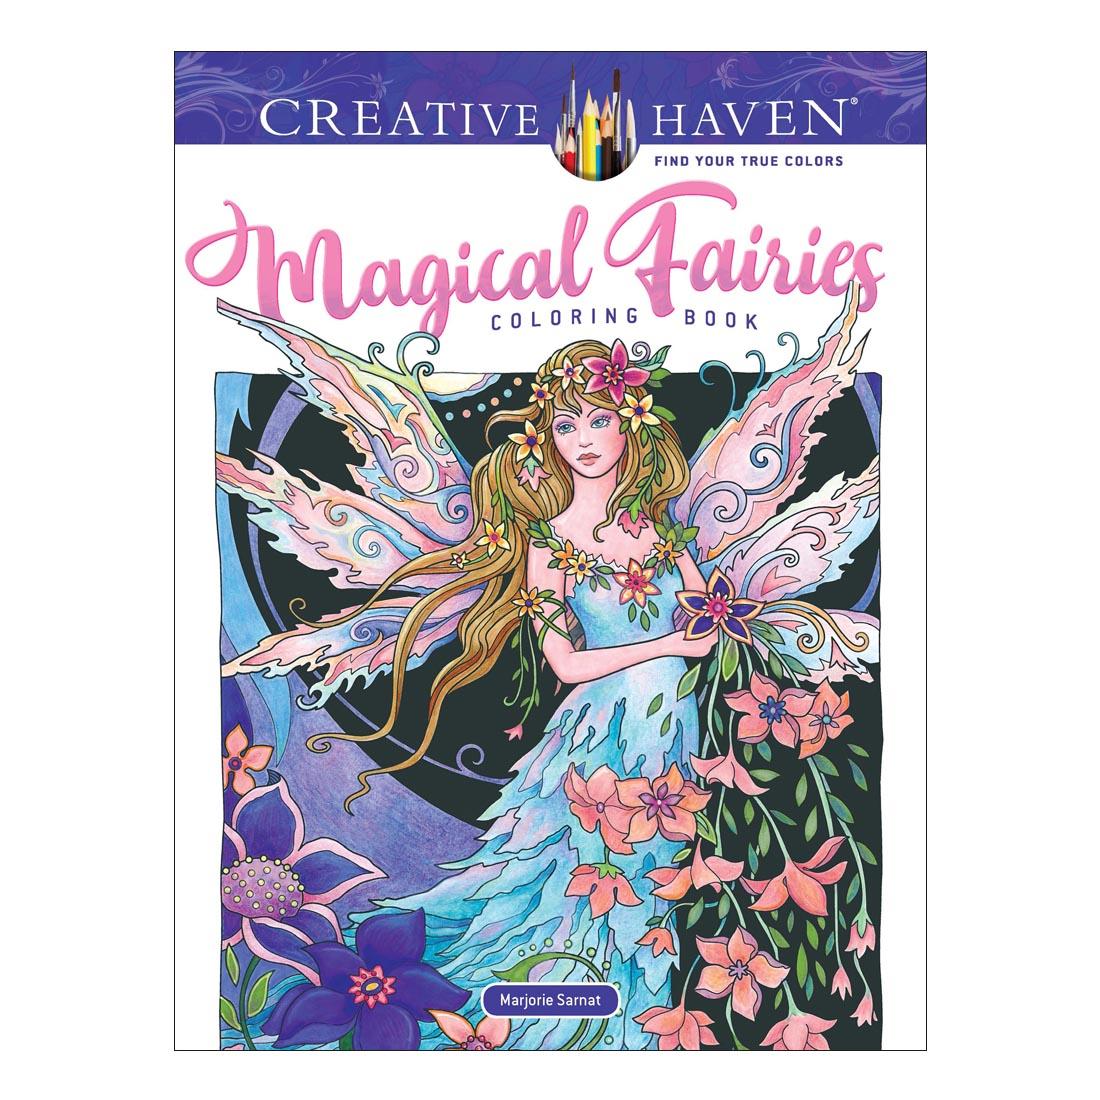 Creative Haven Magical Fairies Coloring Book by Dover